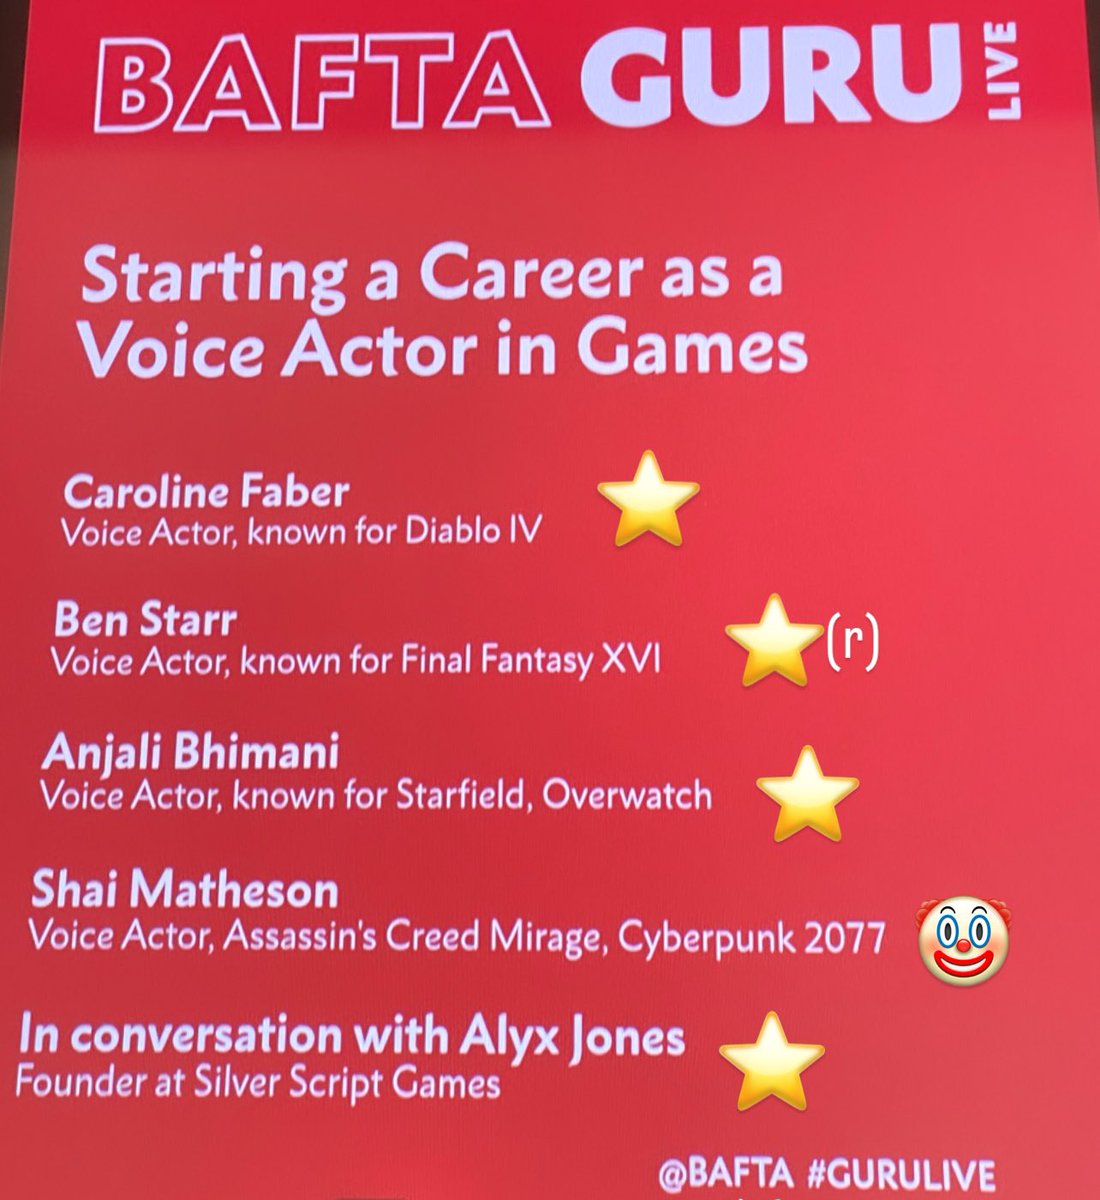 Absolute thrill and honour to share a panel with these talented legends (& get to meet a few afterwards too ☺️)
Thanks for having us @BAFTA and thanks to the lovely warm engaged folks that attended #gurulive! 

@Alyx_Jones @sweeetanj @The_Ben_Starr @carolinefaber @juliabscasting